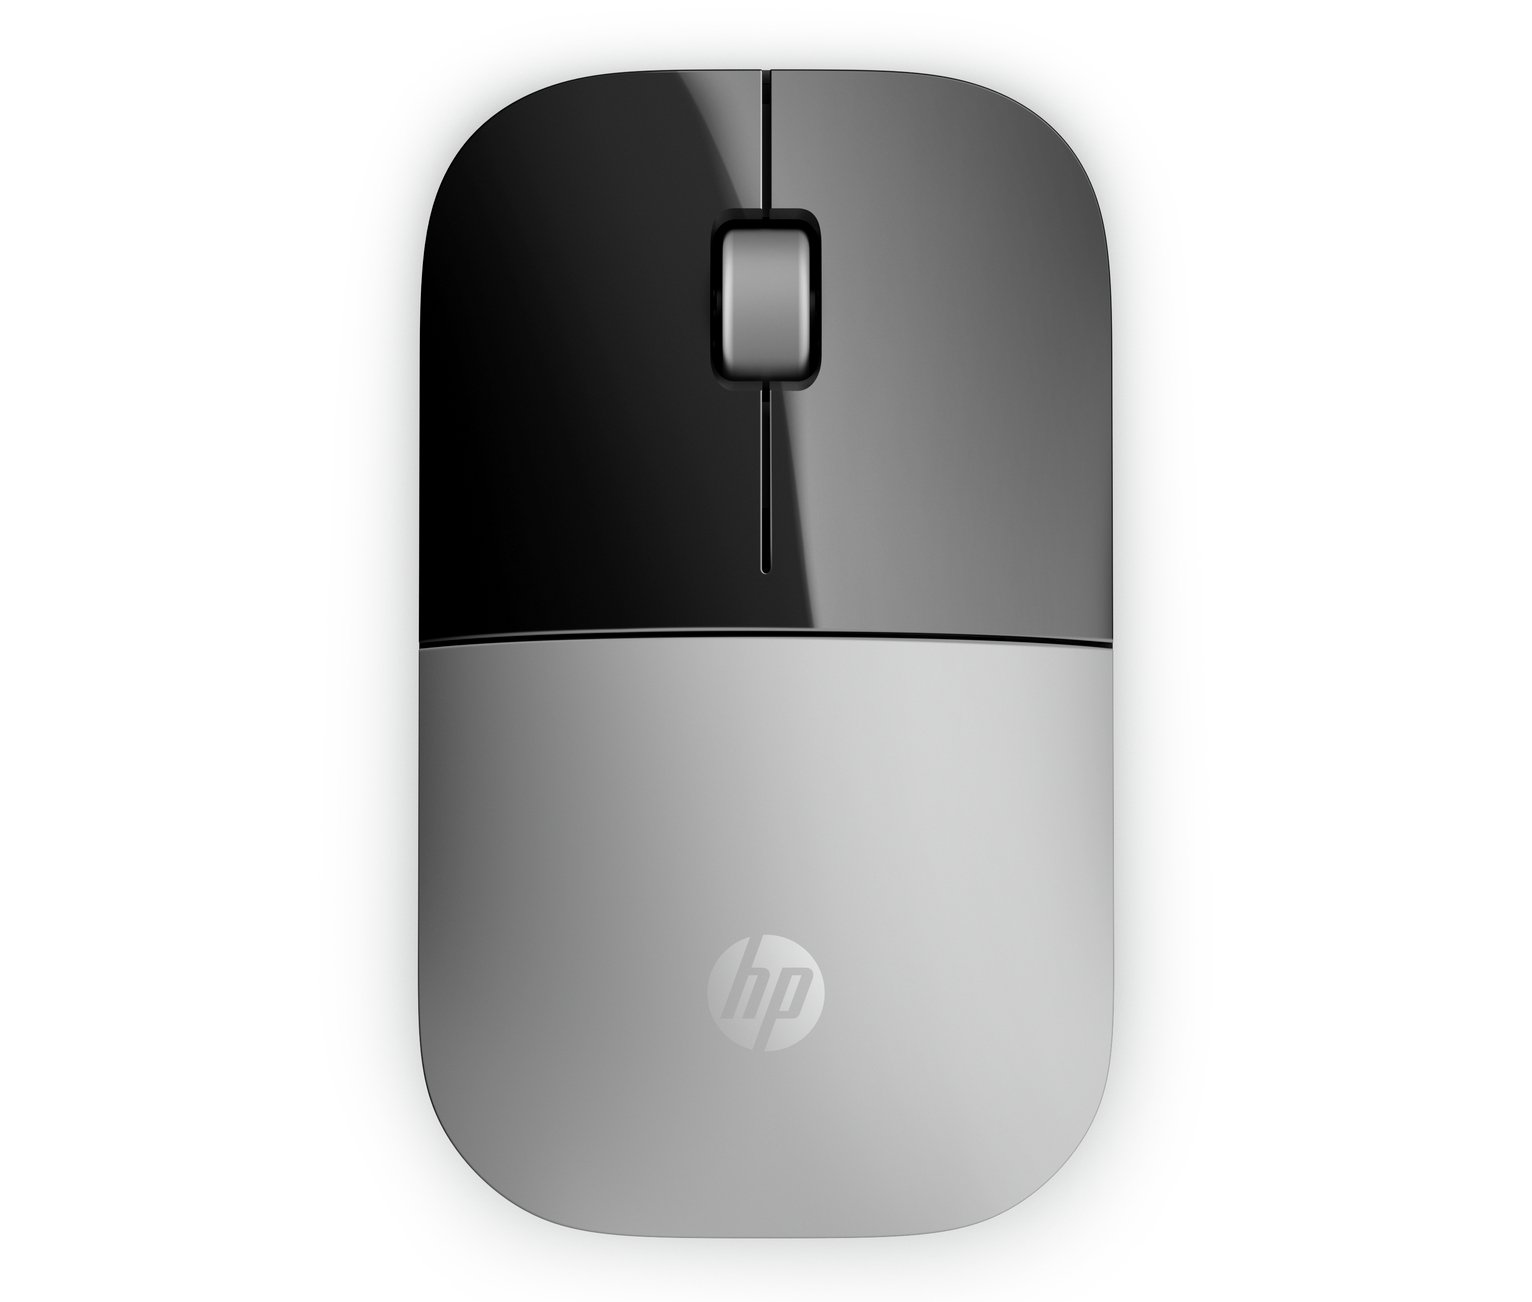 HP Z3700 Wireless Mouse Review